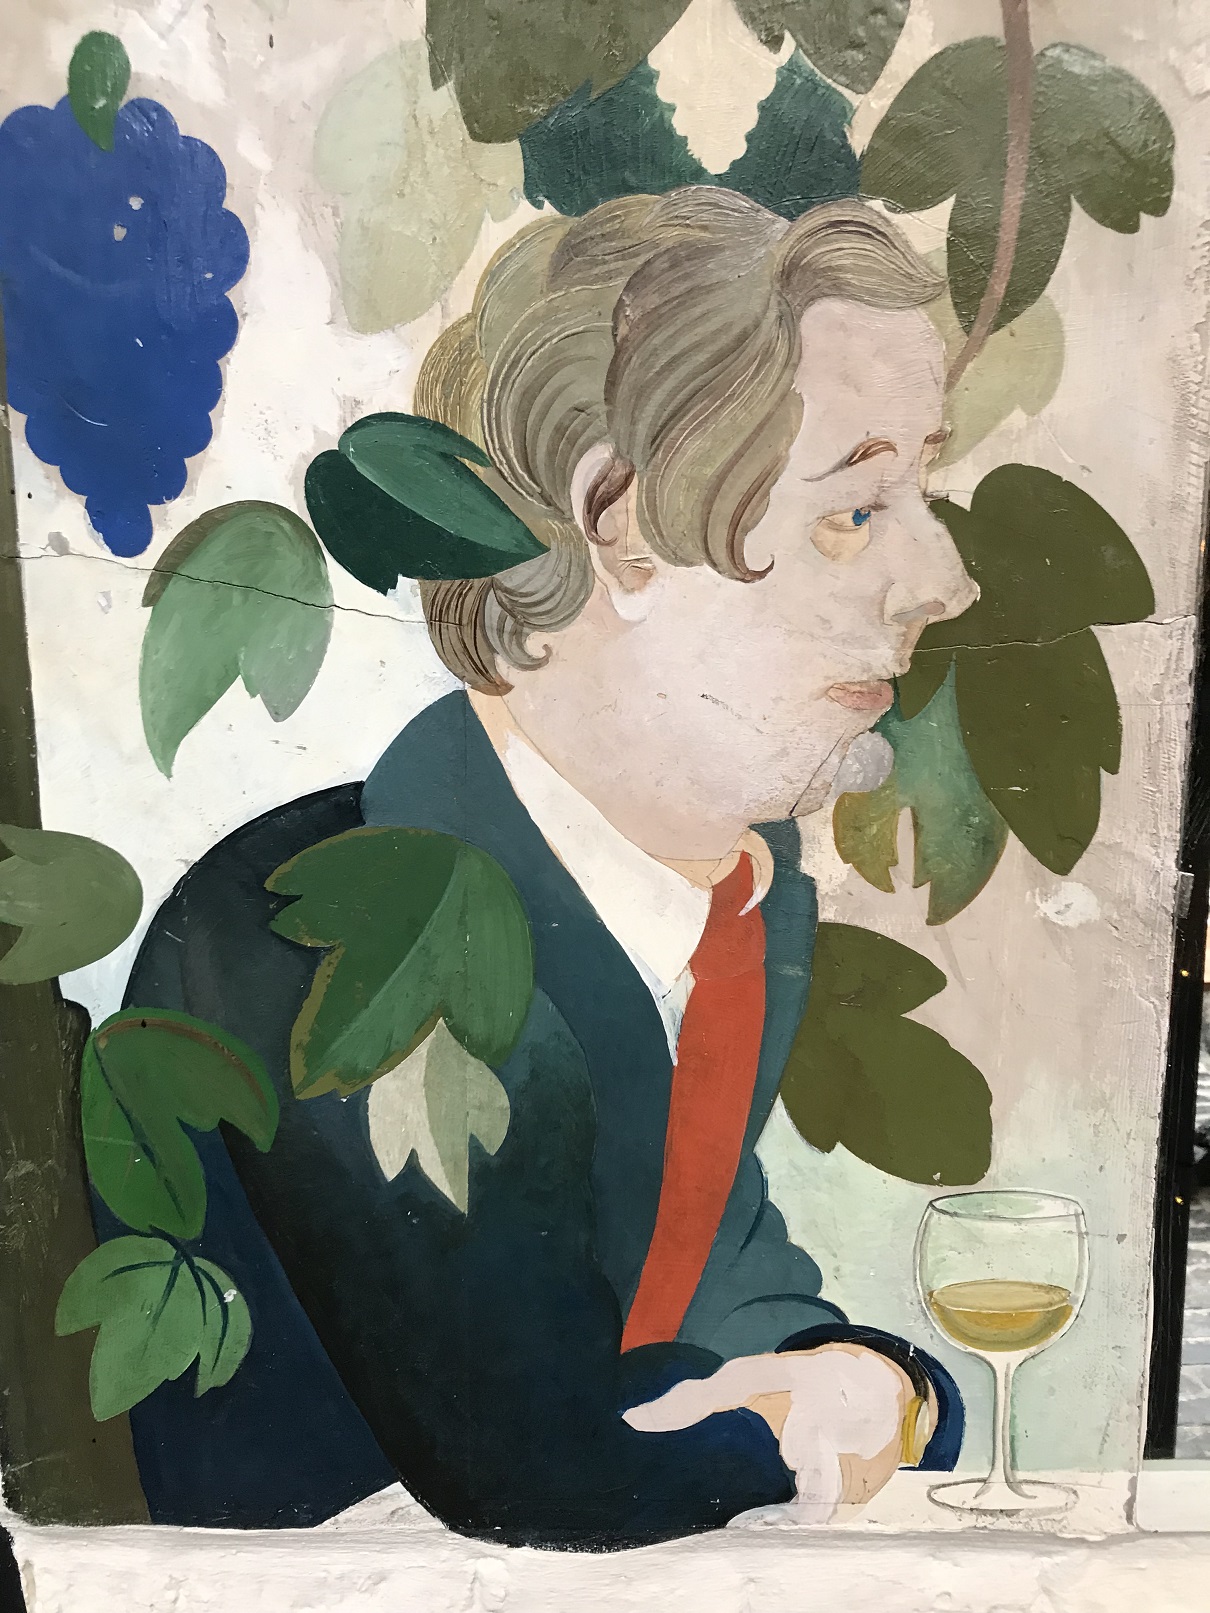 A close up of a person drinking wine as part of the Alasdair Gray mural at the Ubiquitous Chip